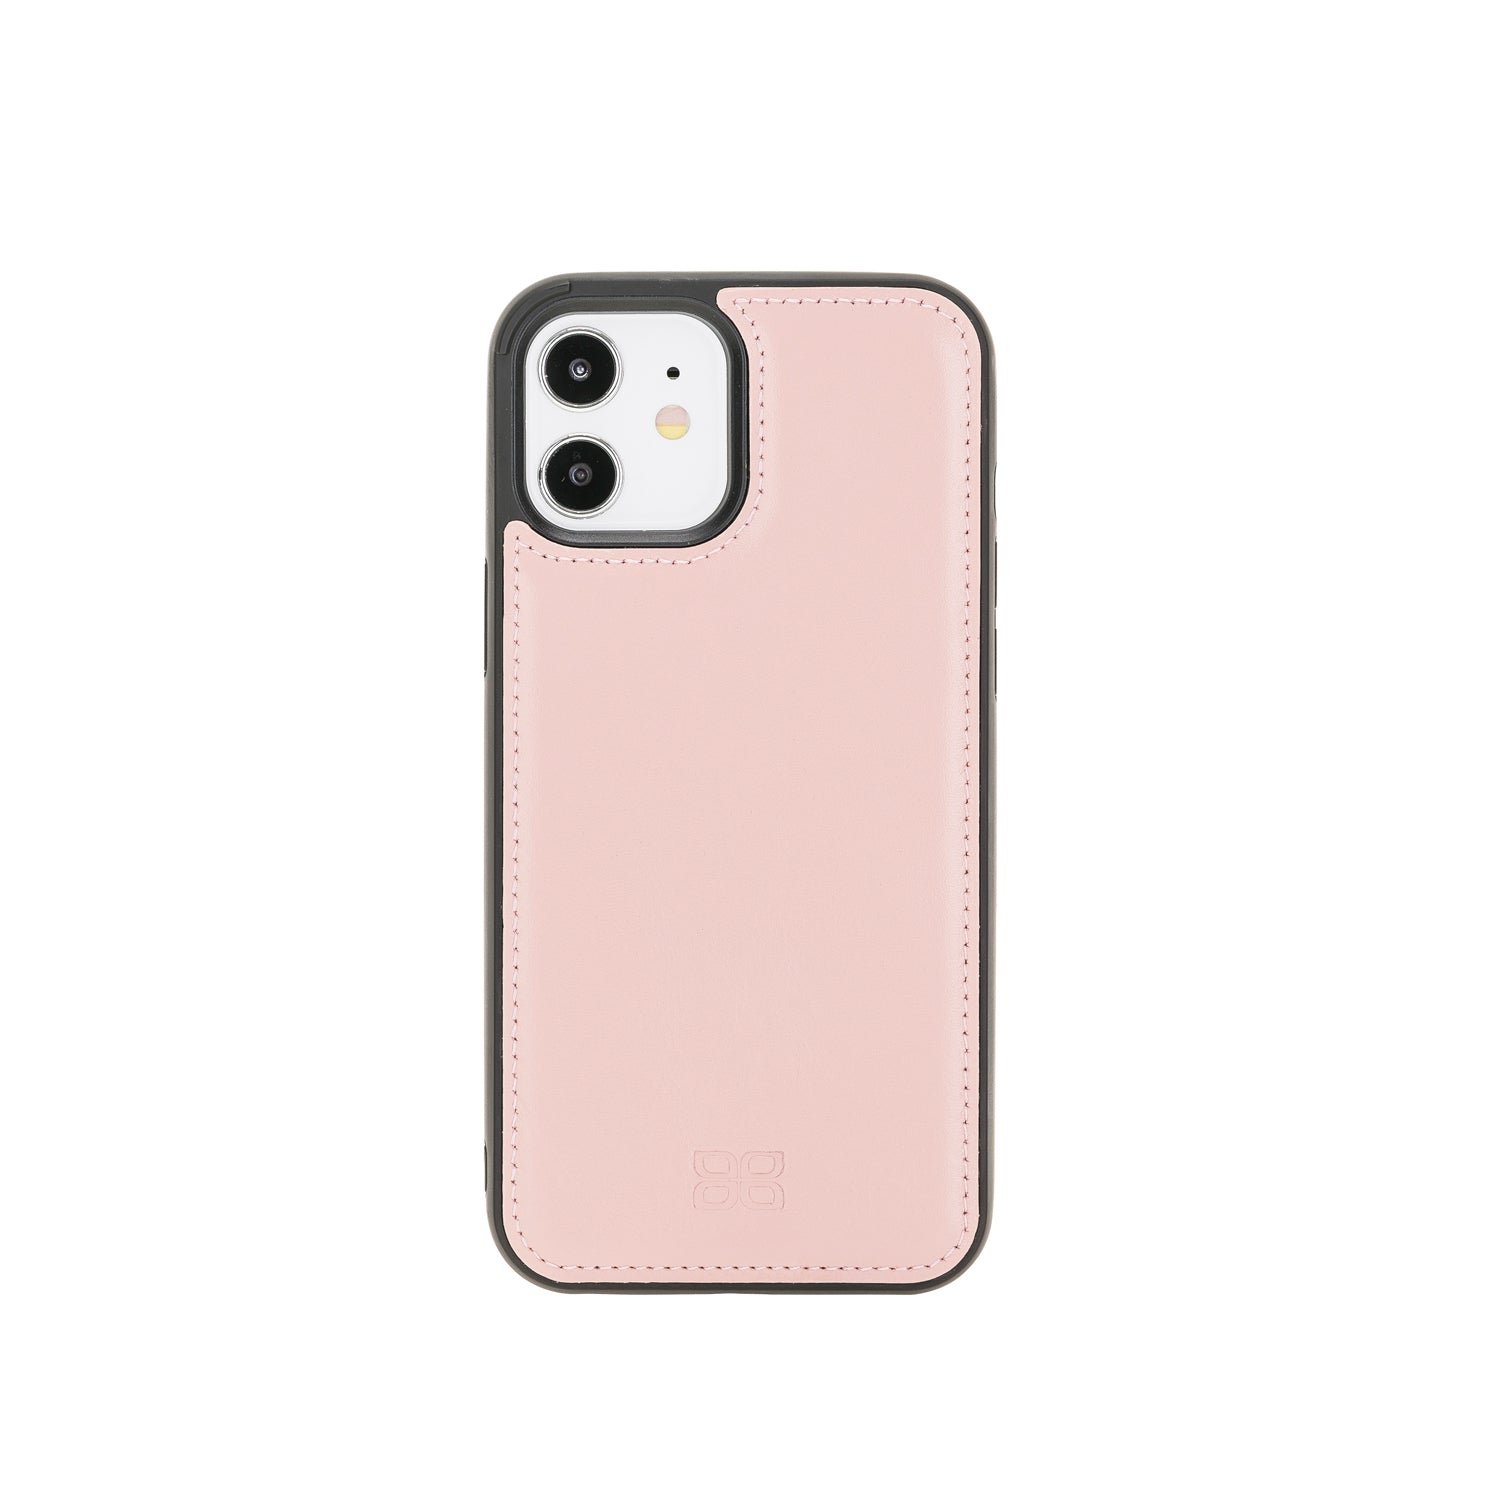 Flex Cover Leather Back Case for iPhone 12 (6.1") - PINK - saracleather